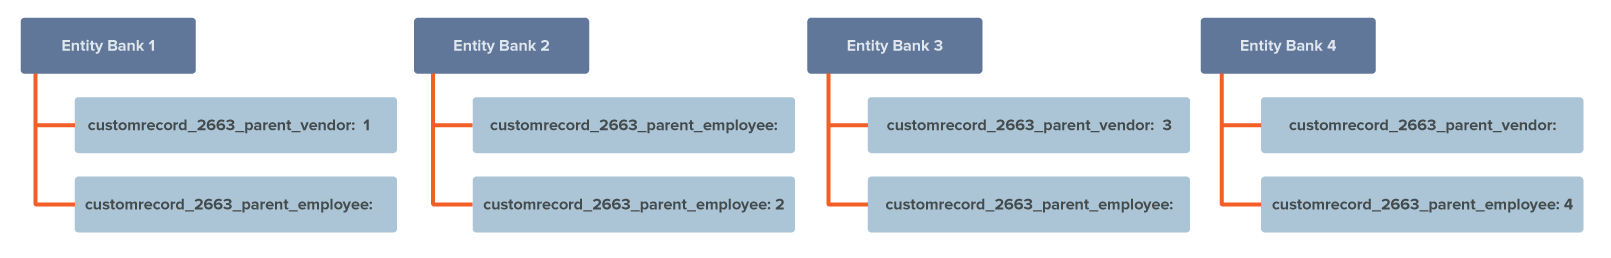 Block diagram showing an example of payments grouped by 4 entity banks.